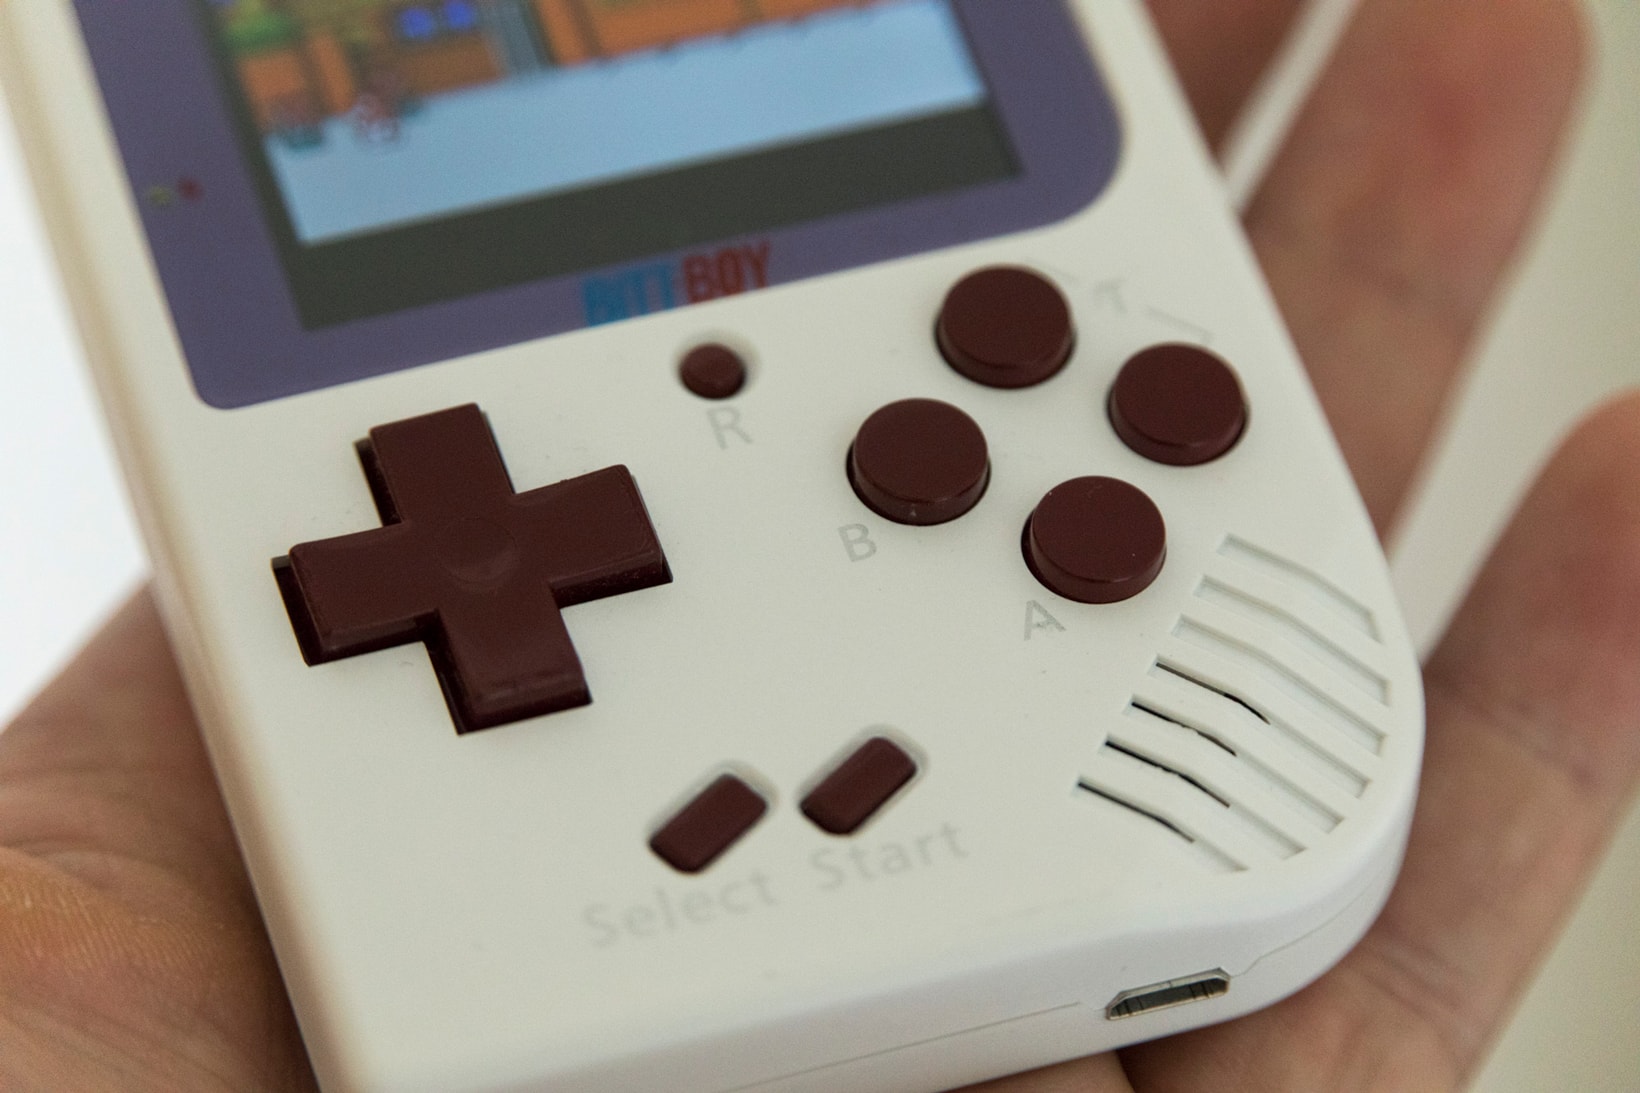 BittBoy Is Like a GameBoy With 300 Games-In-One